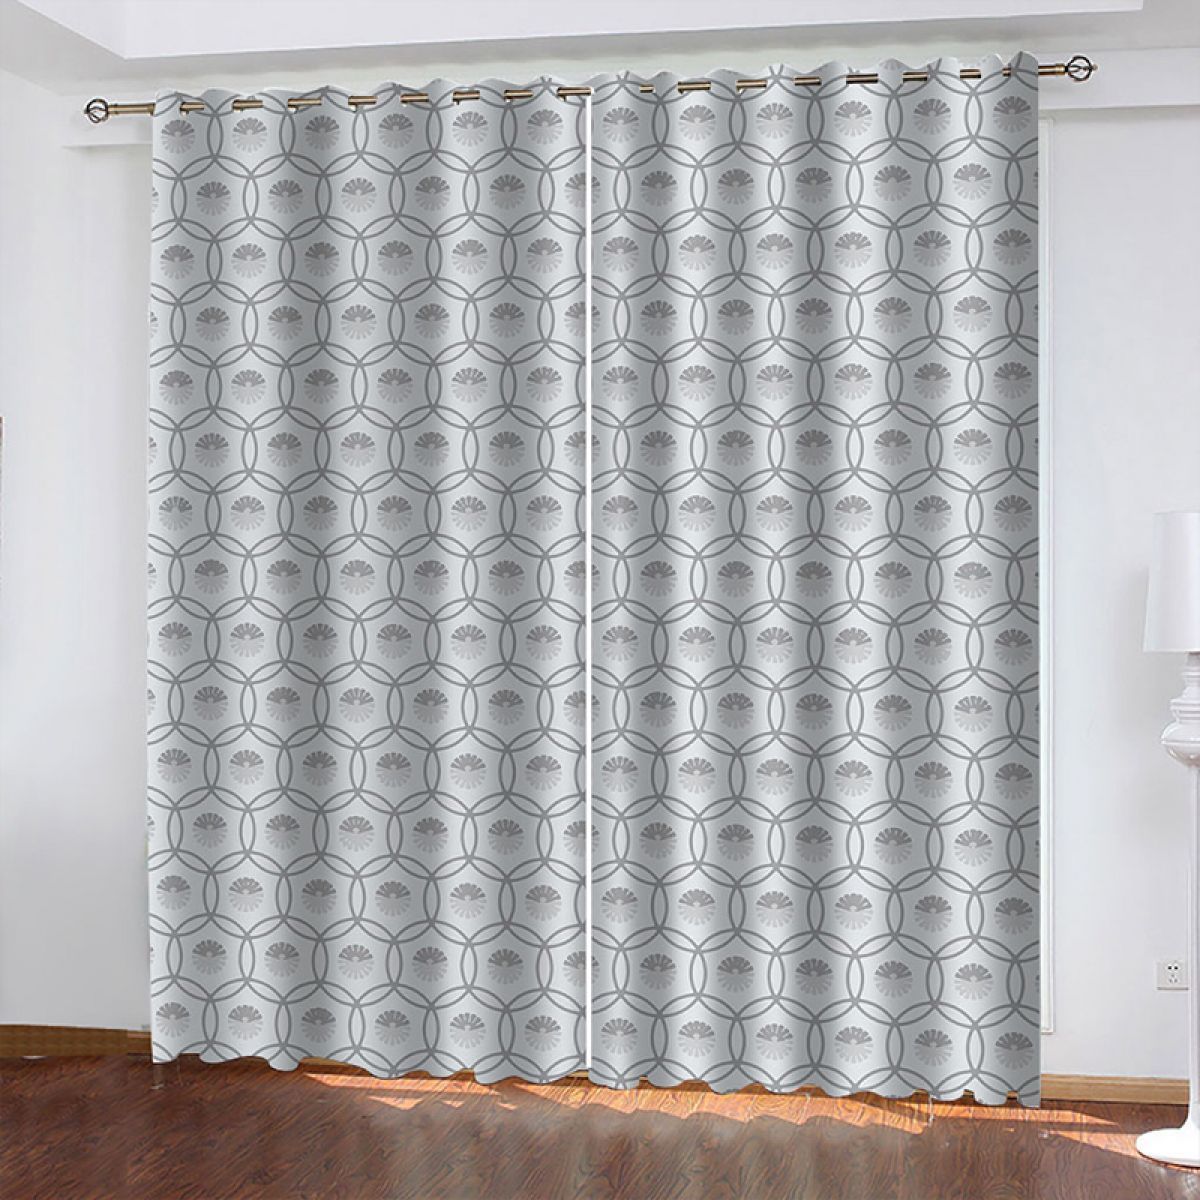 3d intersecting circles printed window curtain home decor 5666